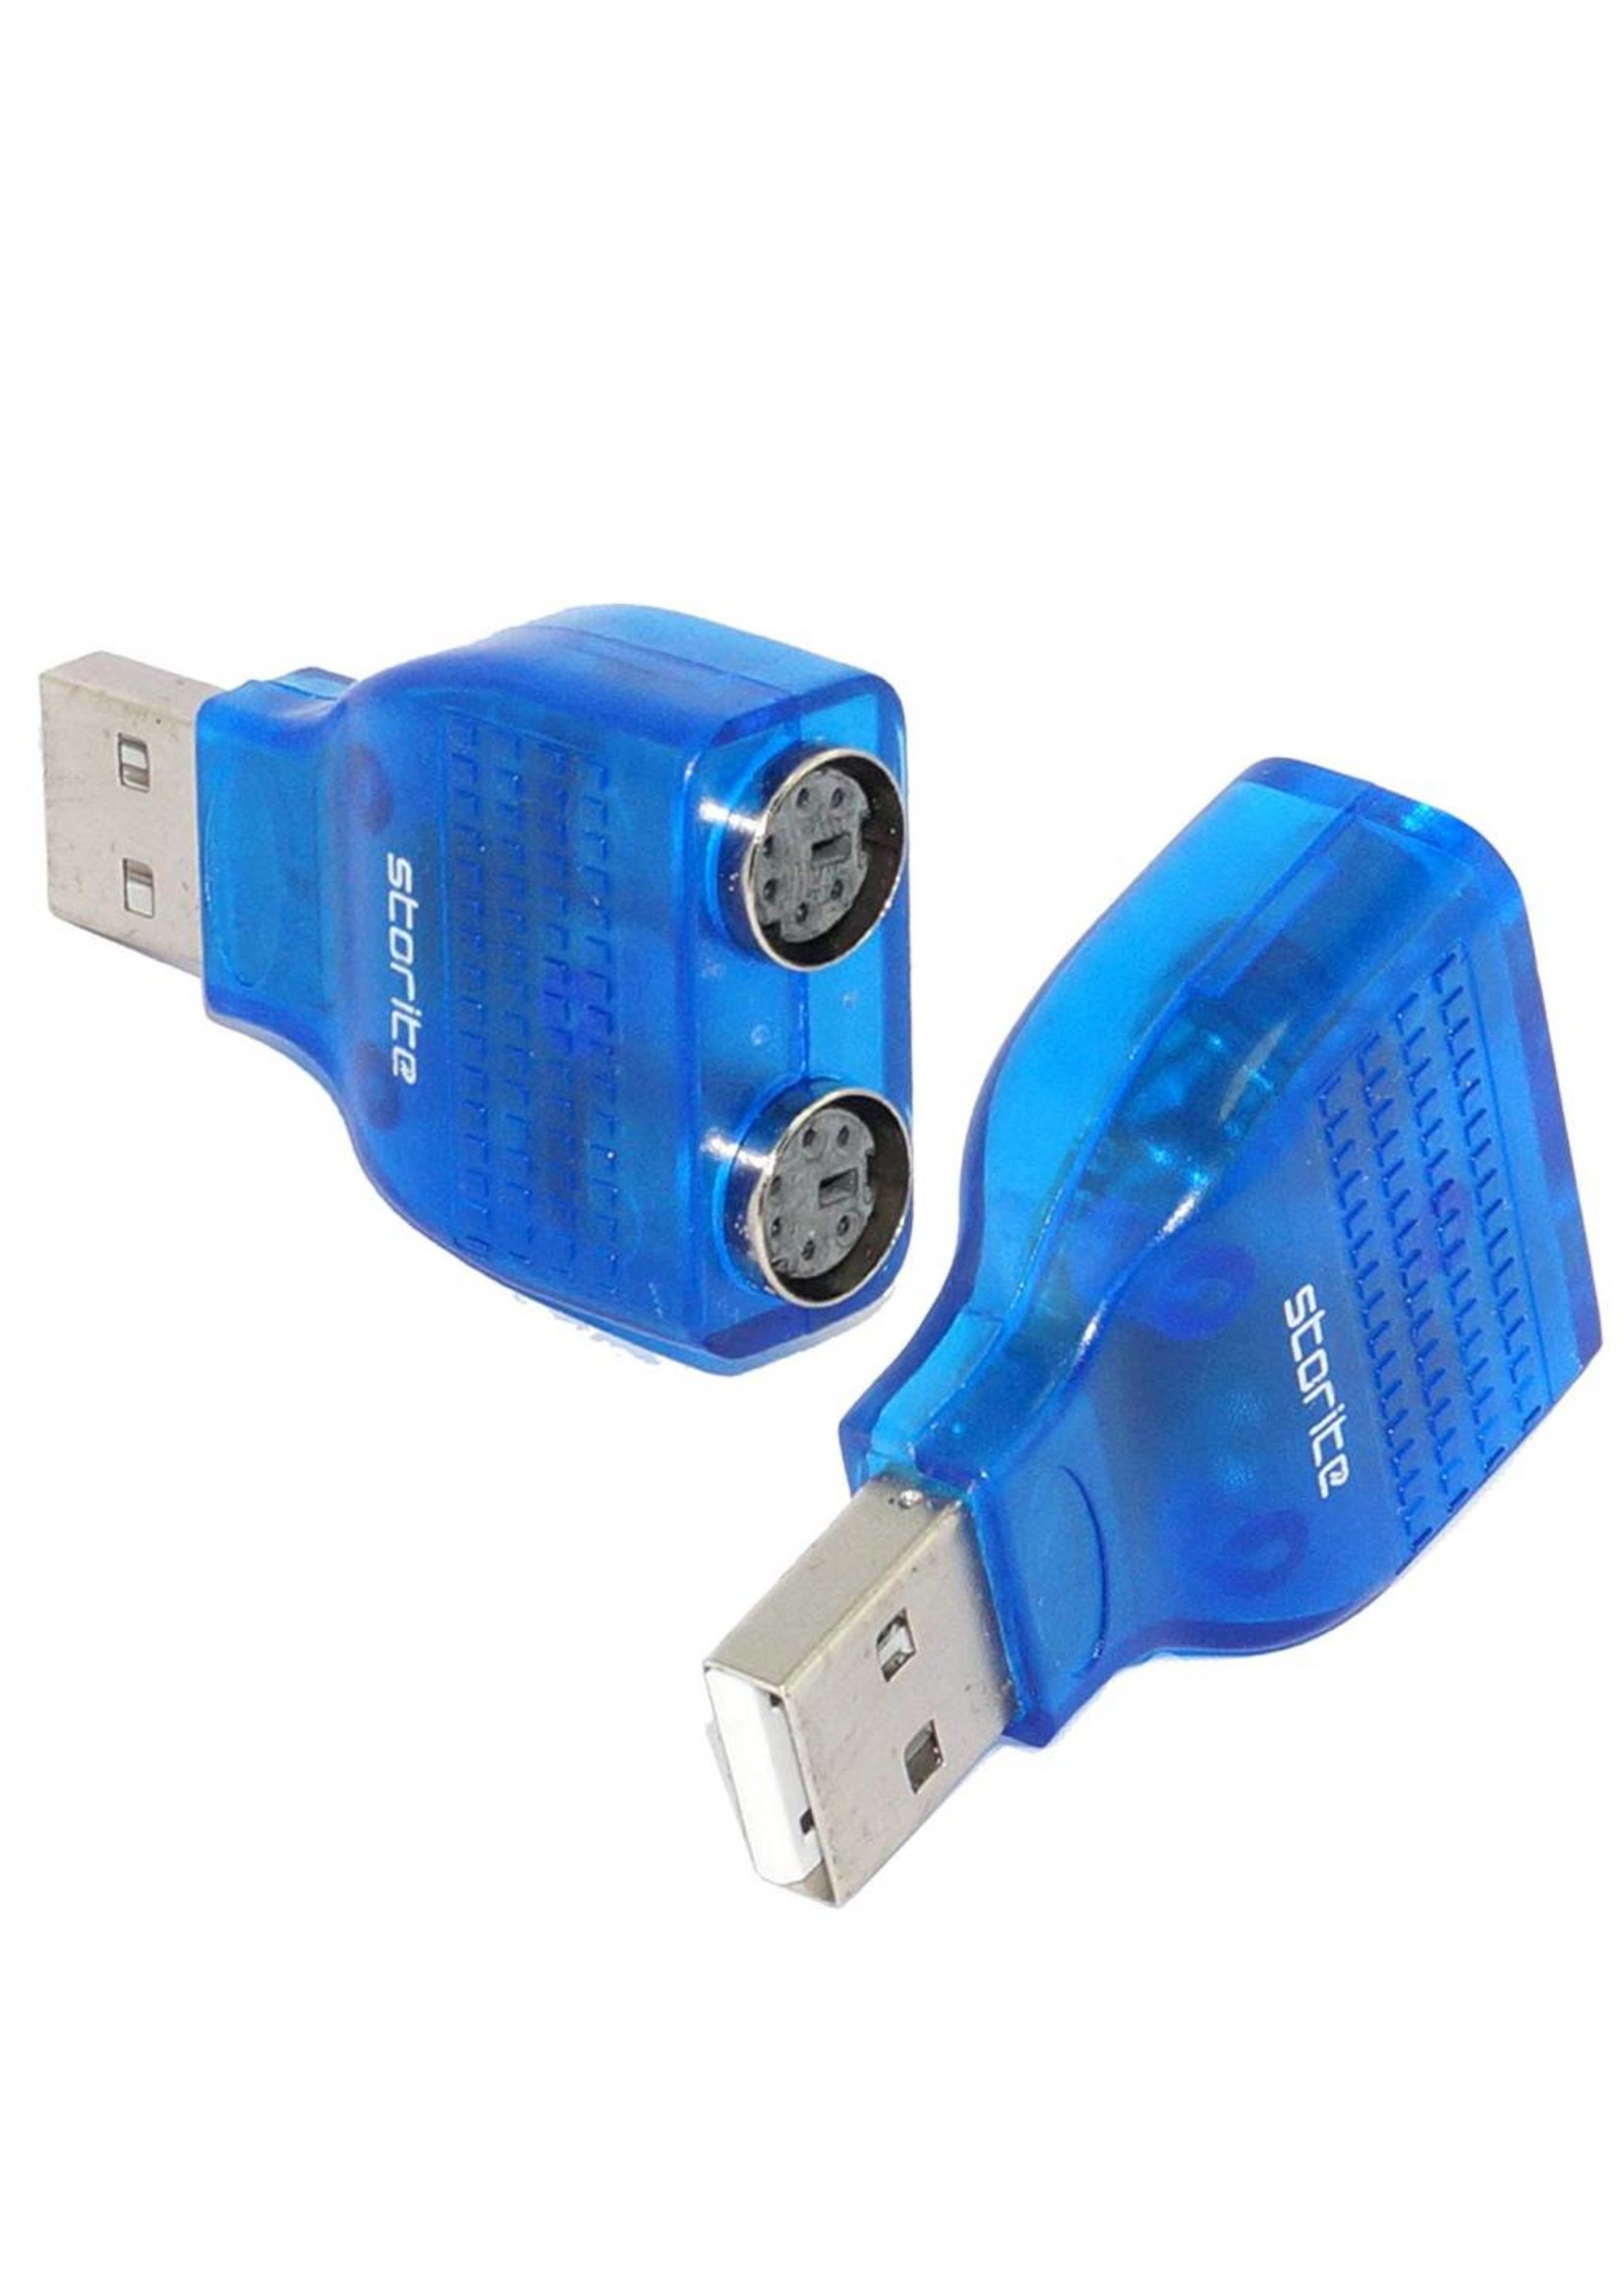 USB-2.0 to PS/2 Adapter